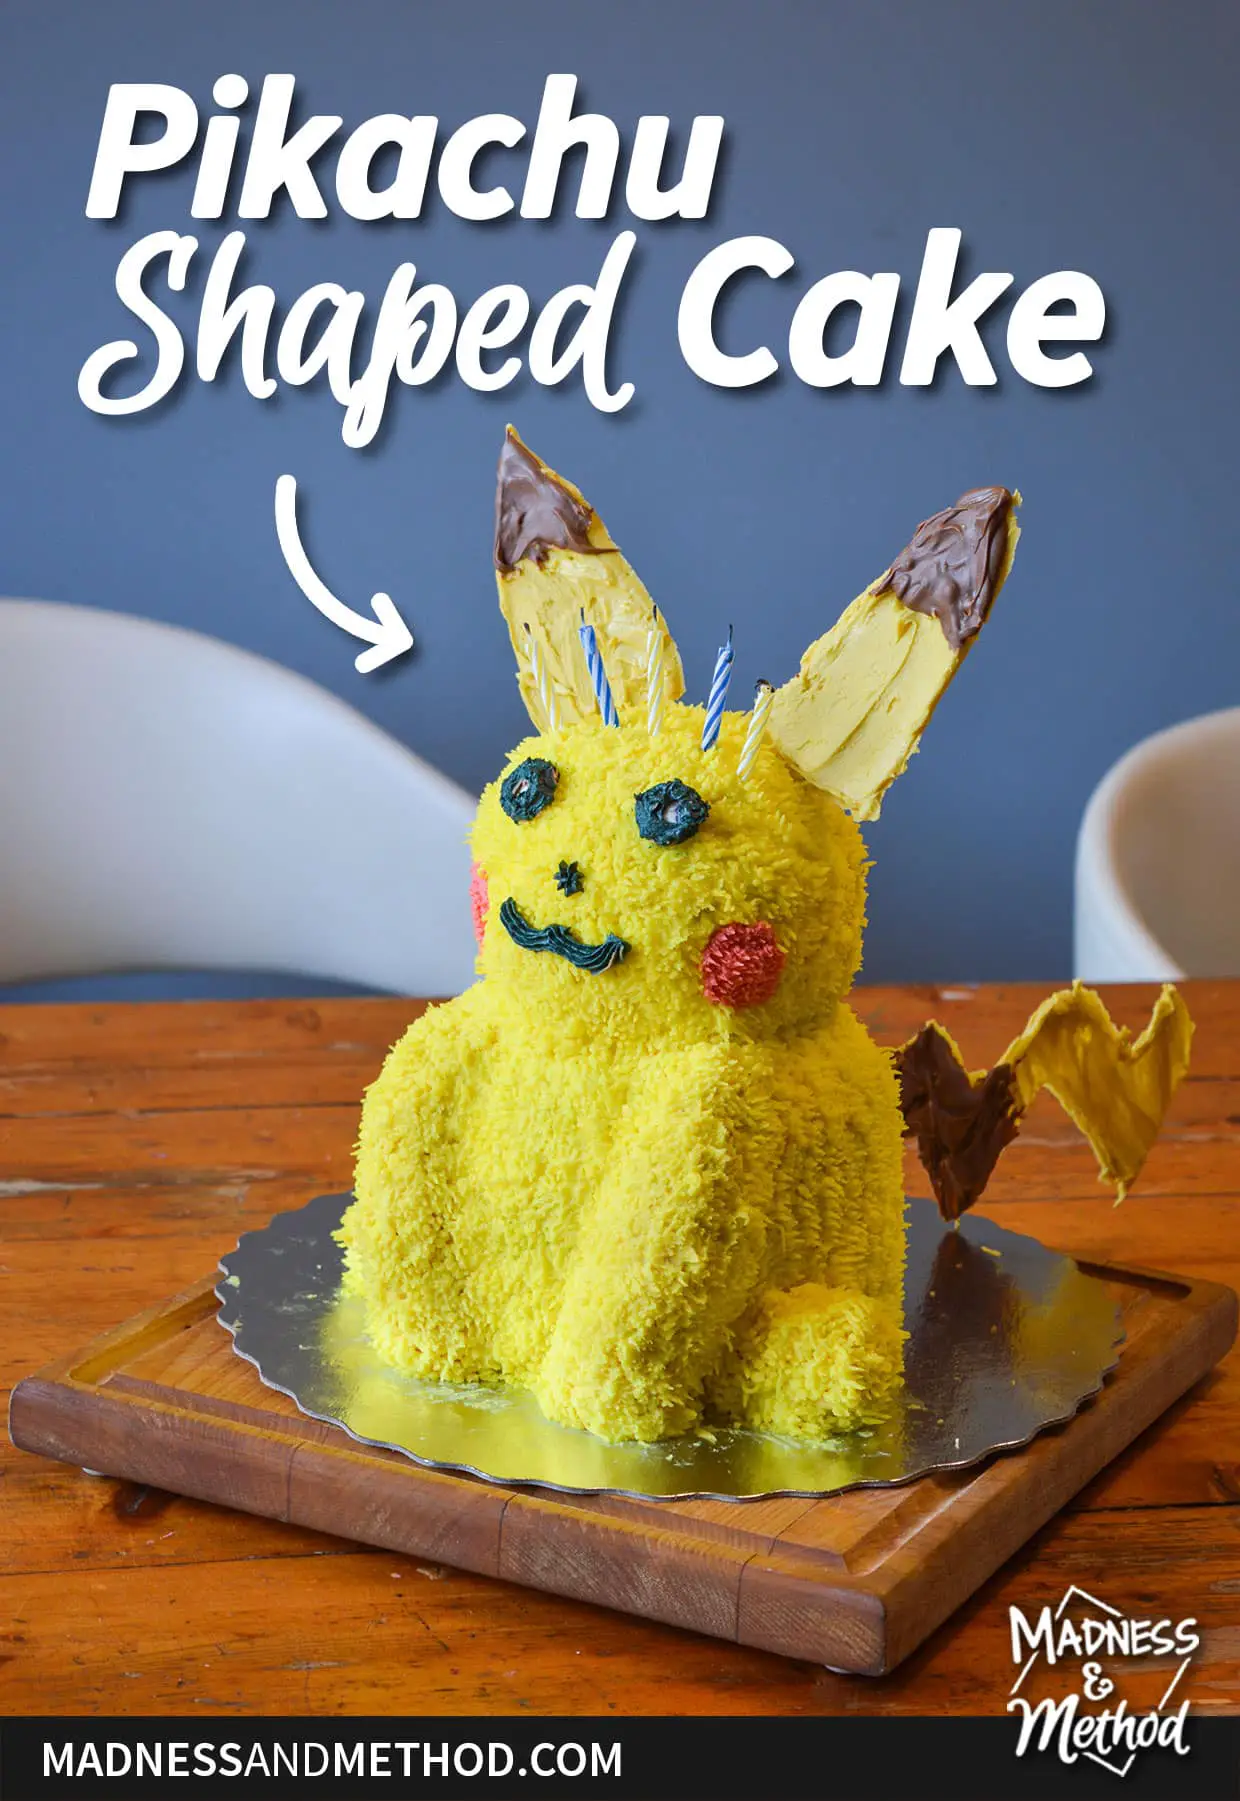 Pikachu shaped cake with candles